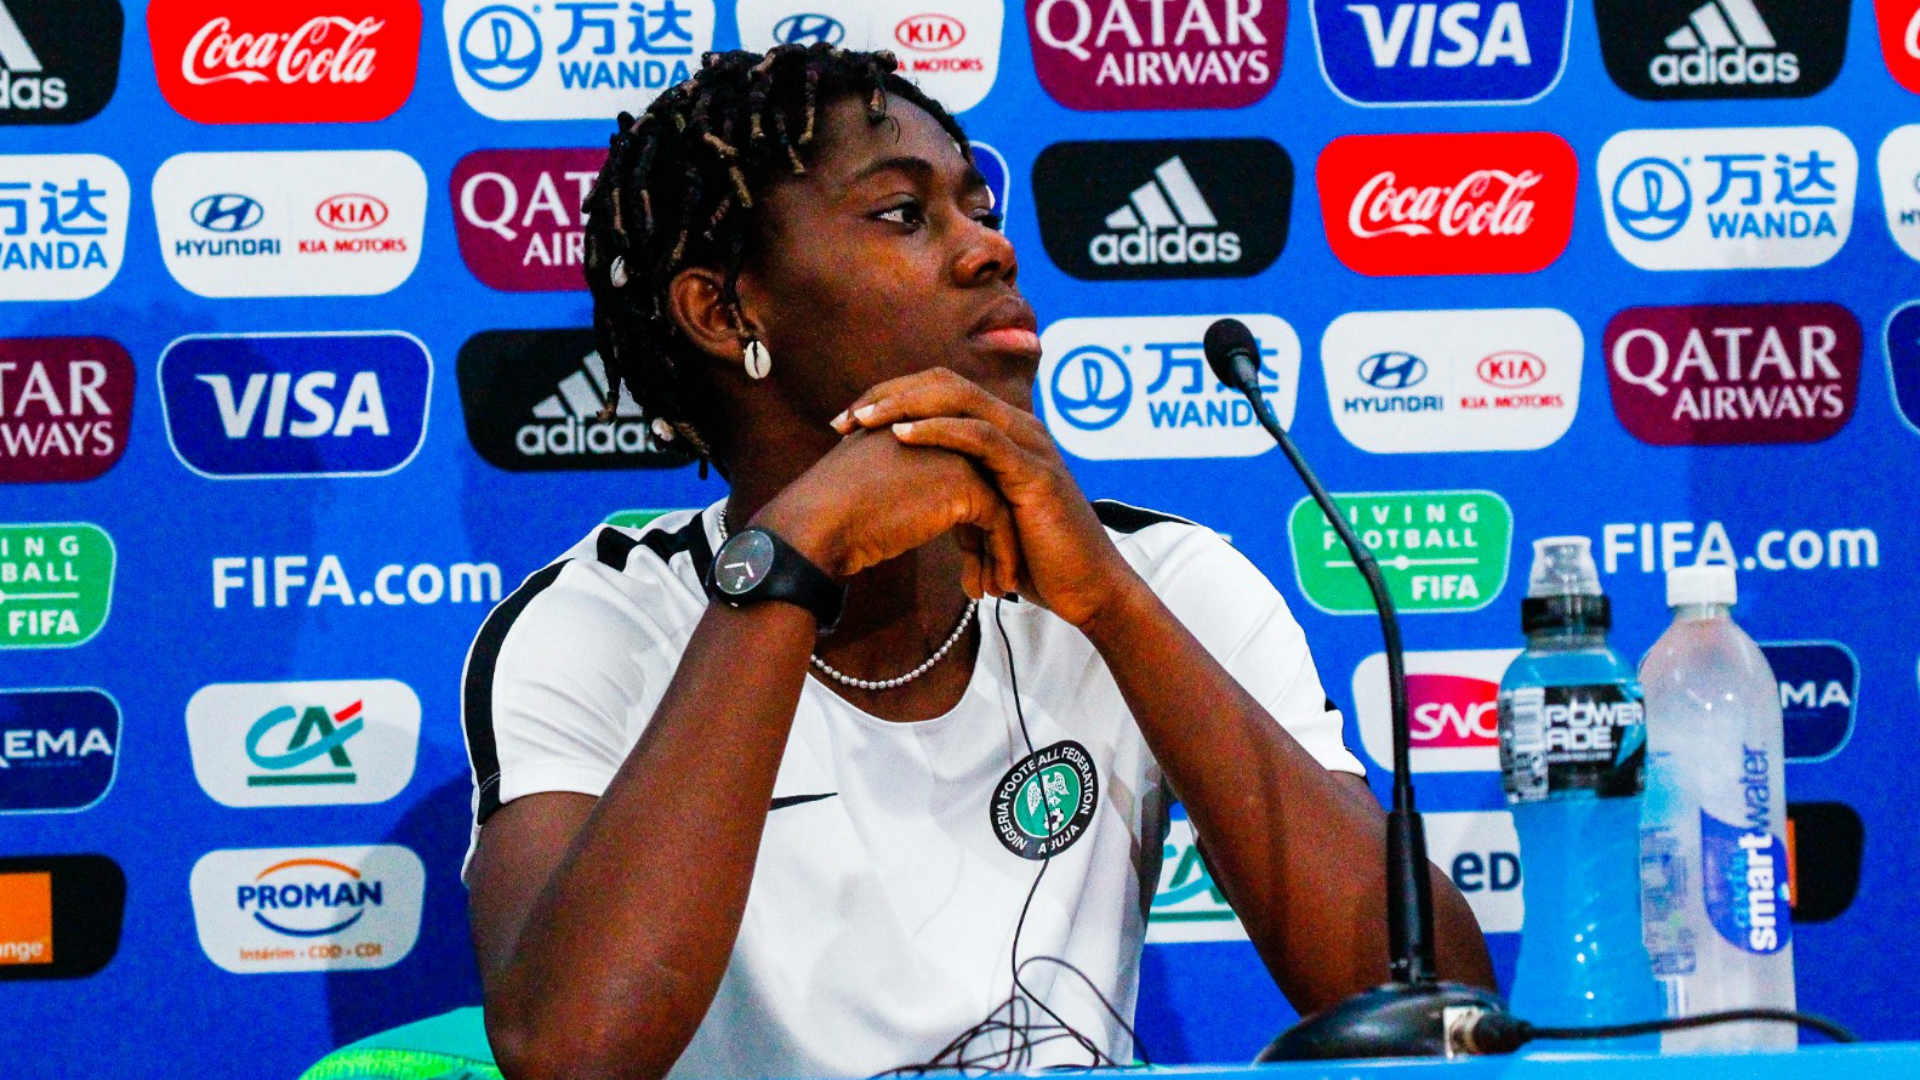 2022 Awcon Qualifiers: ‘Everyone is in a competitive mood’ – Nigeria's Oshoala talks tough ahead of Ghana clash